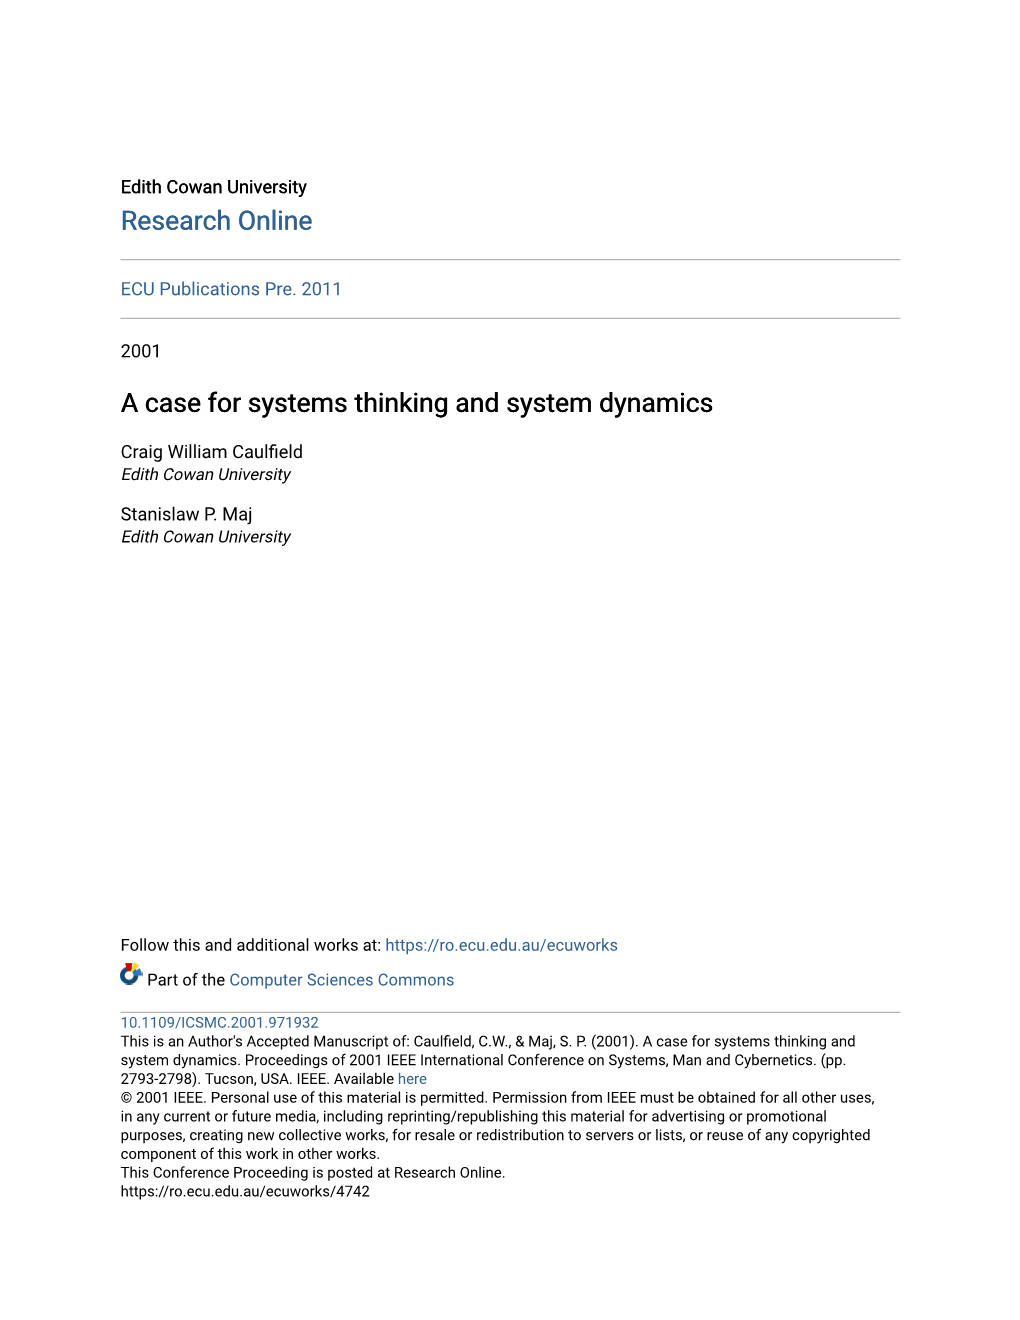 A Case for Systems Thinking and System Dynamics